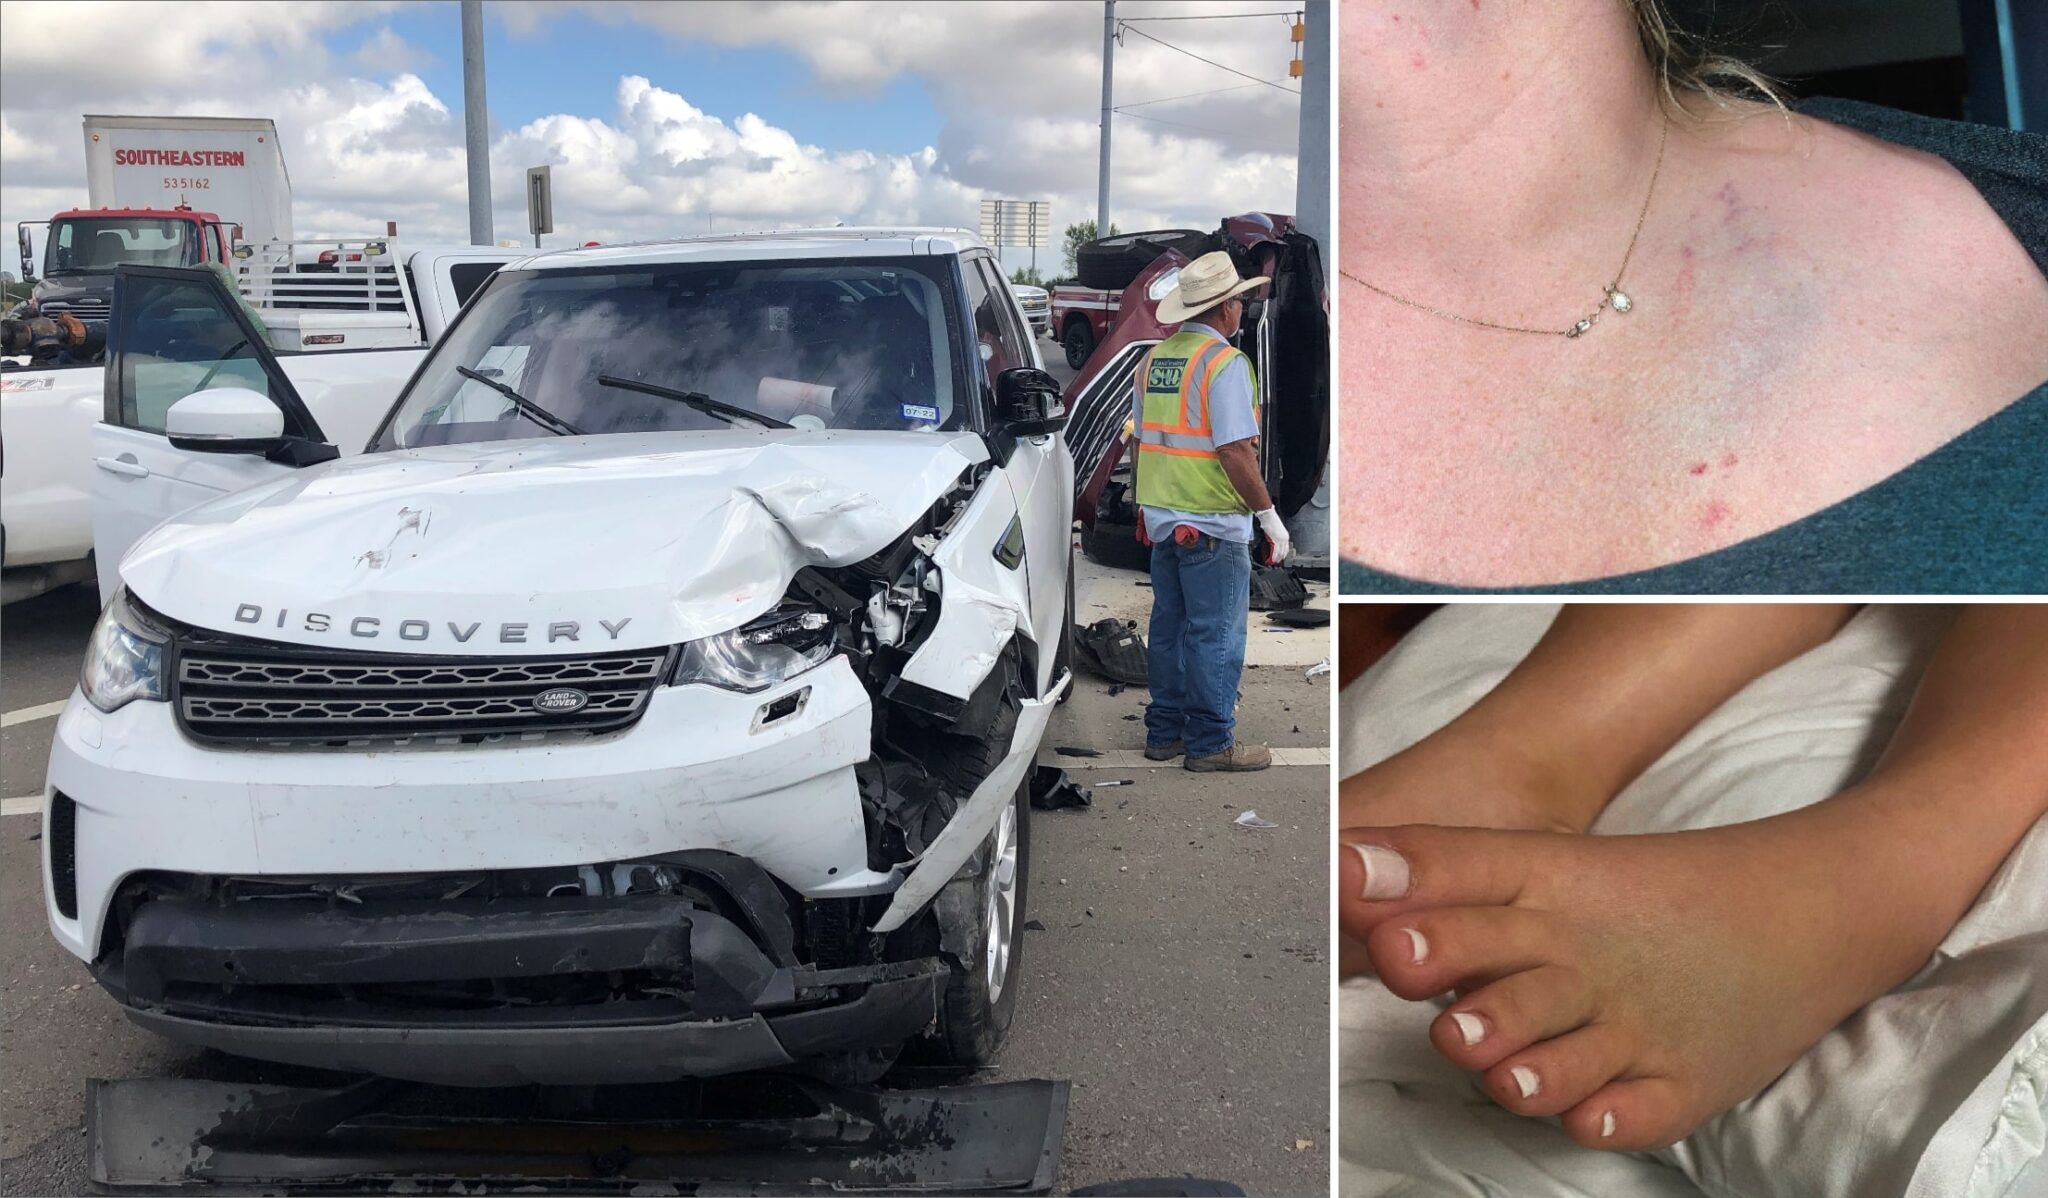 An SUV with driver's side damage, a close-up of bruising on the neck, and broken toes